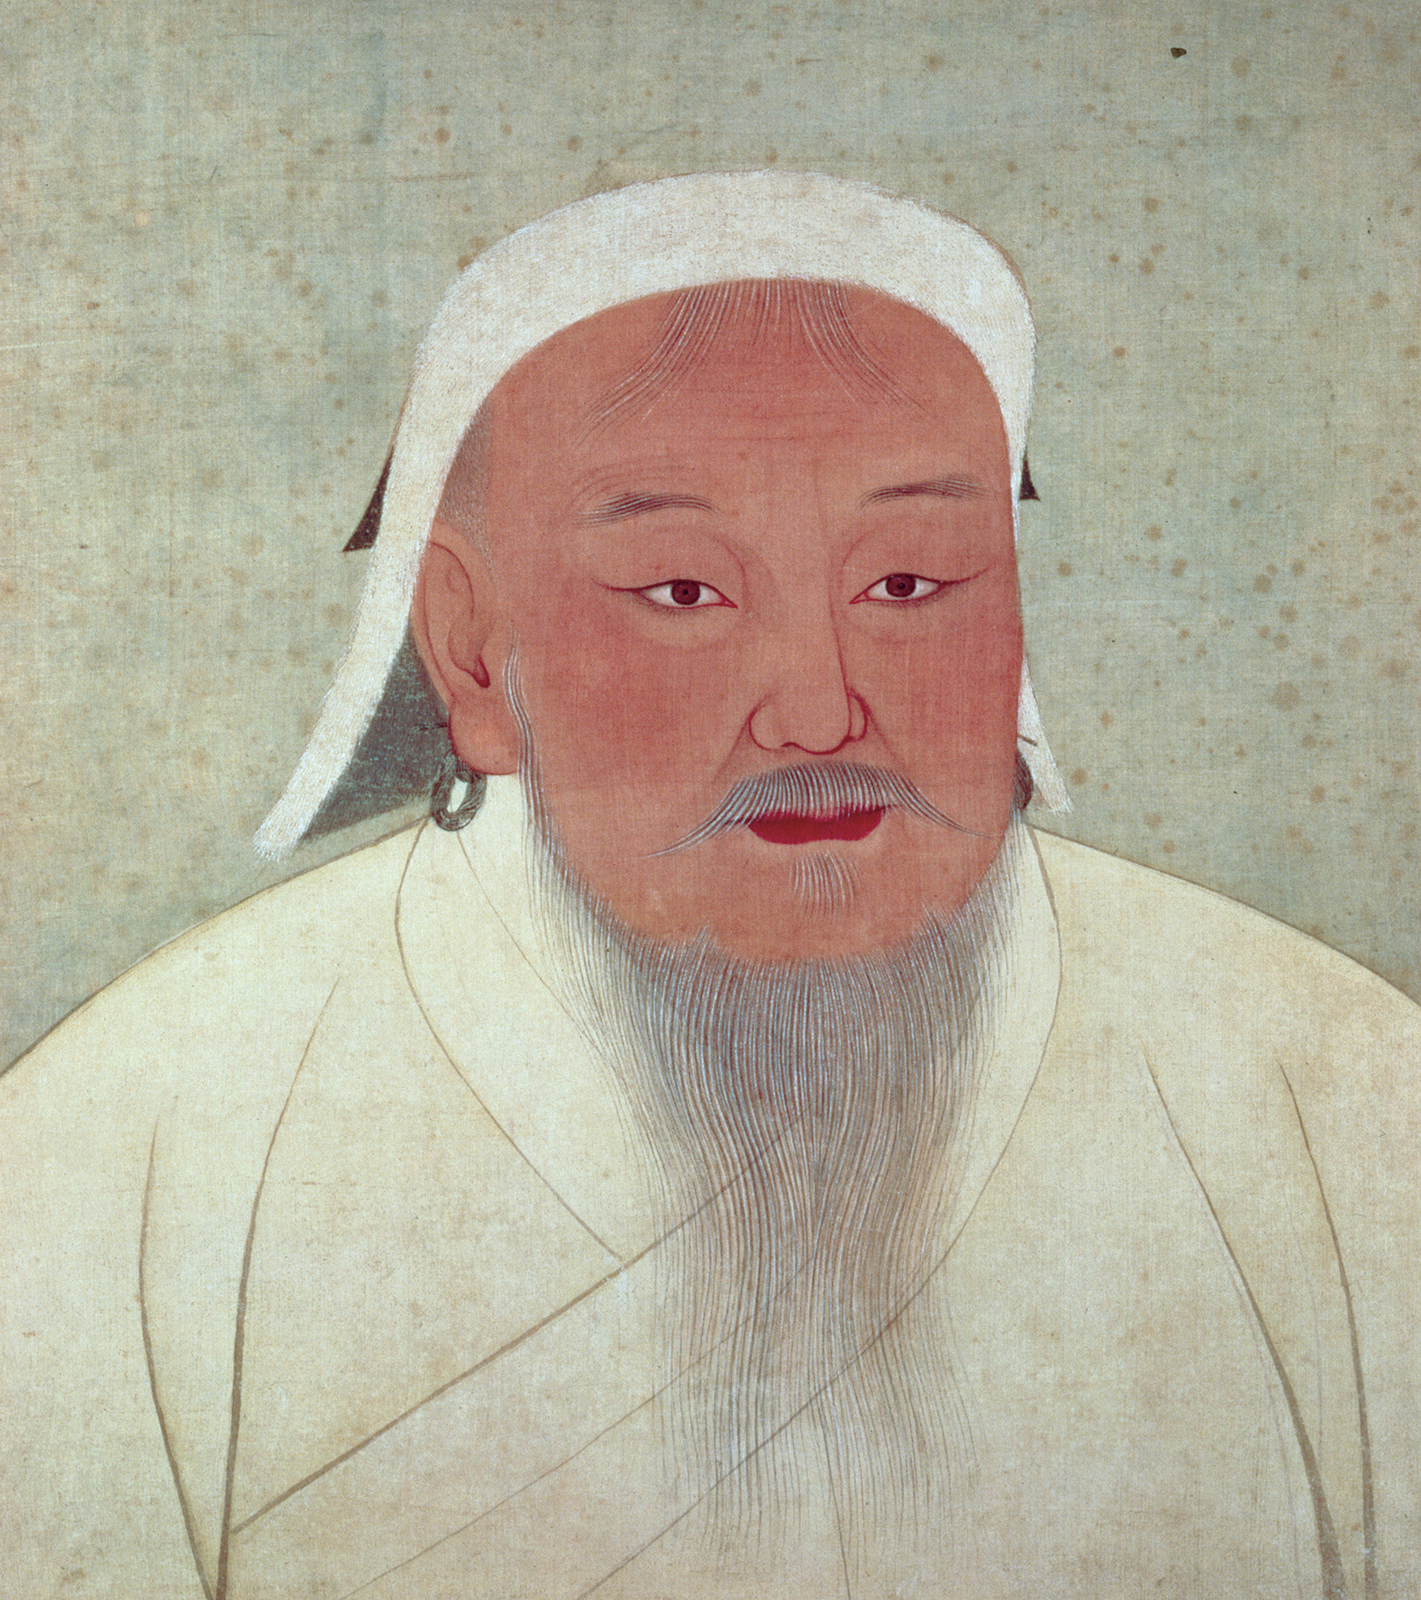 Only Extremely Legit History Buffs Can Identify These 50 Legendary People Genghis Khan